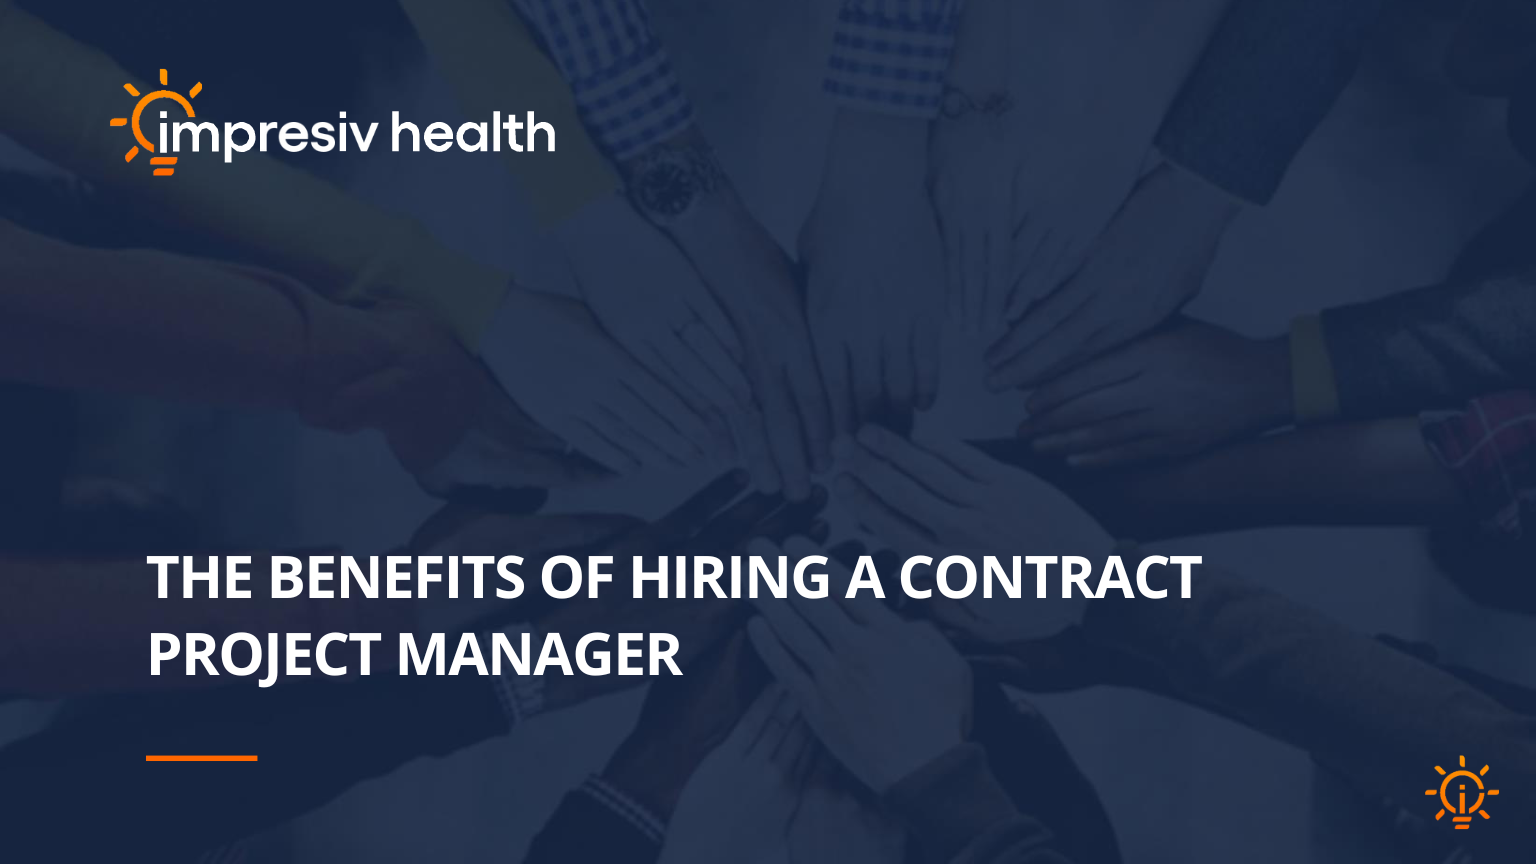 The Benefits of Hiring A Contract Project Manager